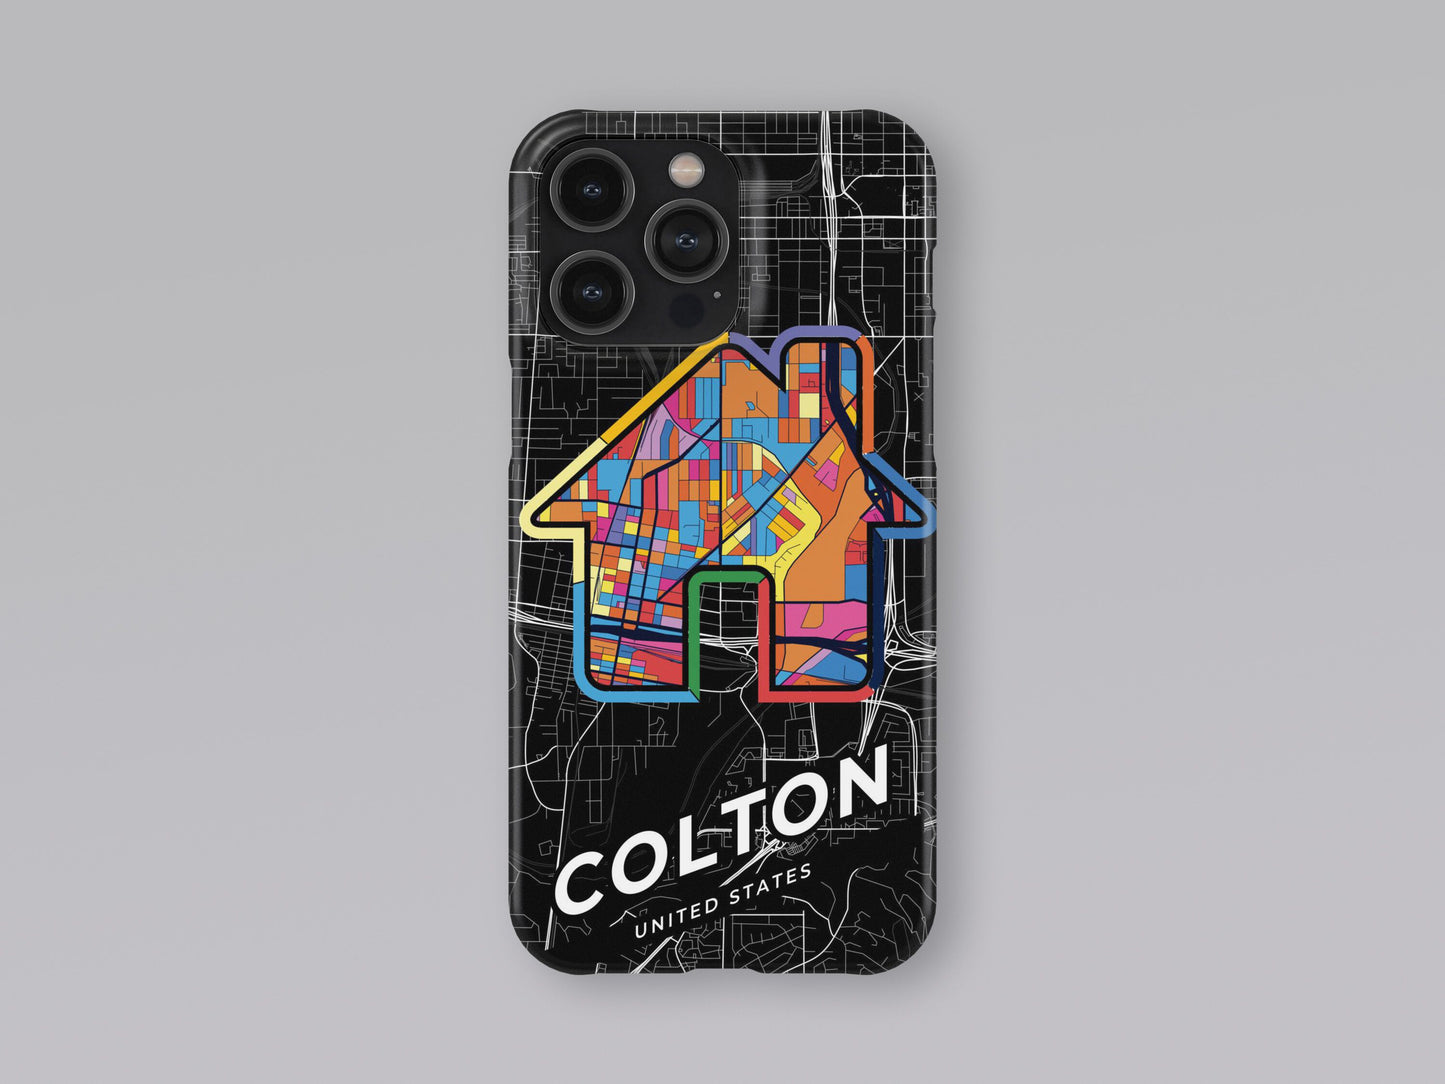 Colton California slim phone case with colorful icon. Birthday, wedding or housewarming gift. Couple match cases. 3